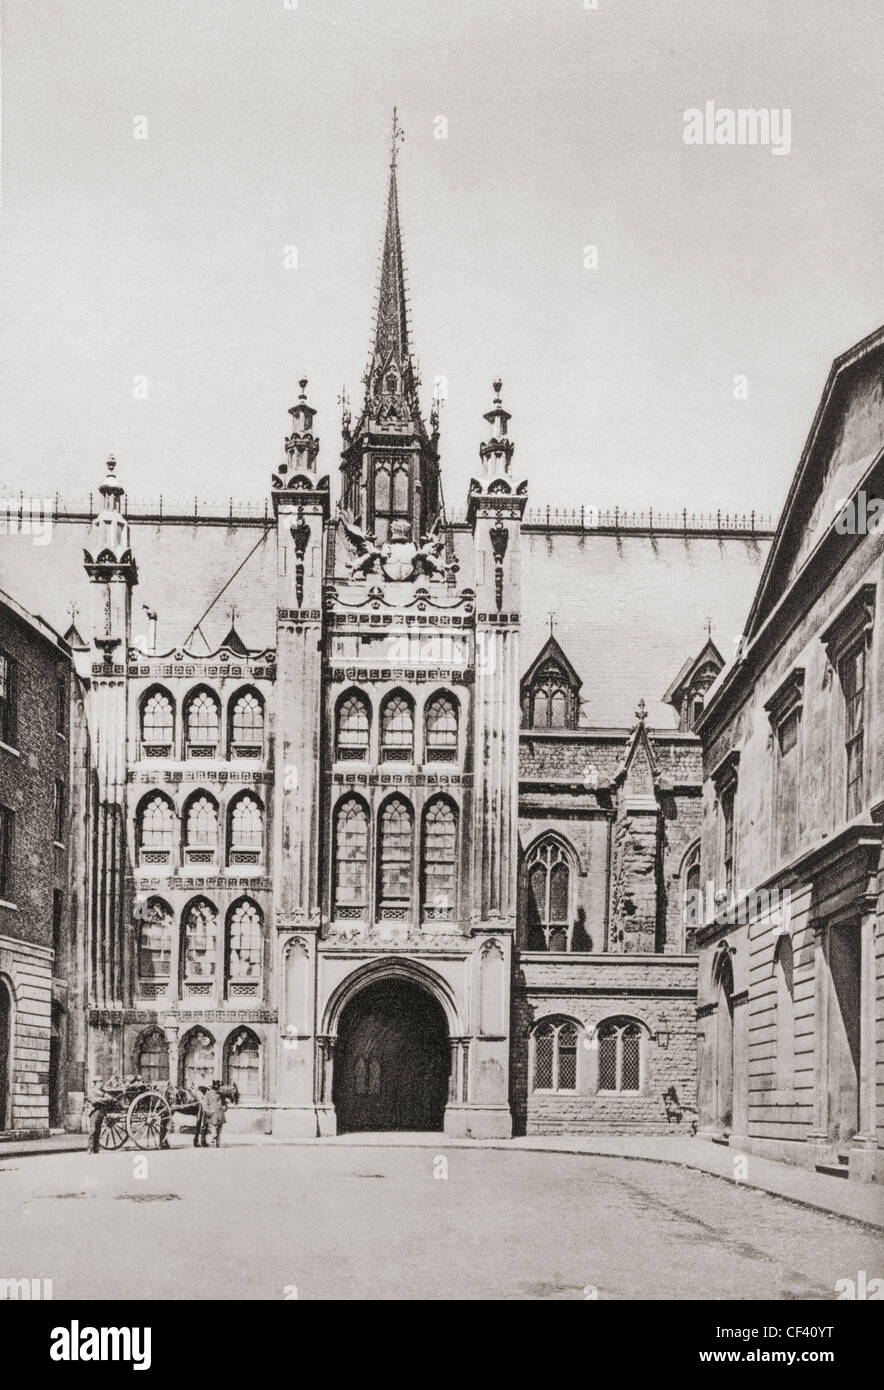 The Guildhall, London, England in the late 19th century. From London ...